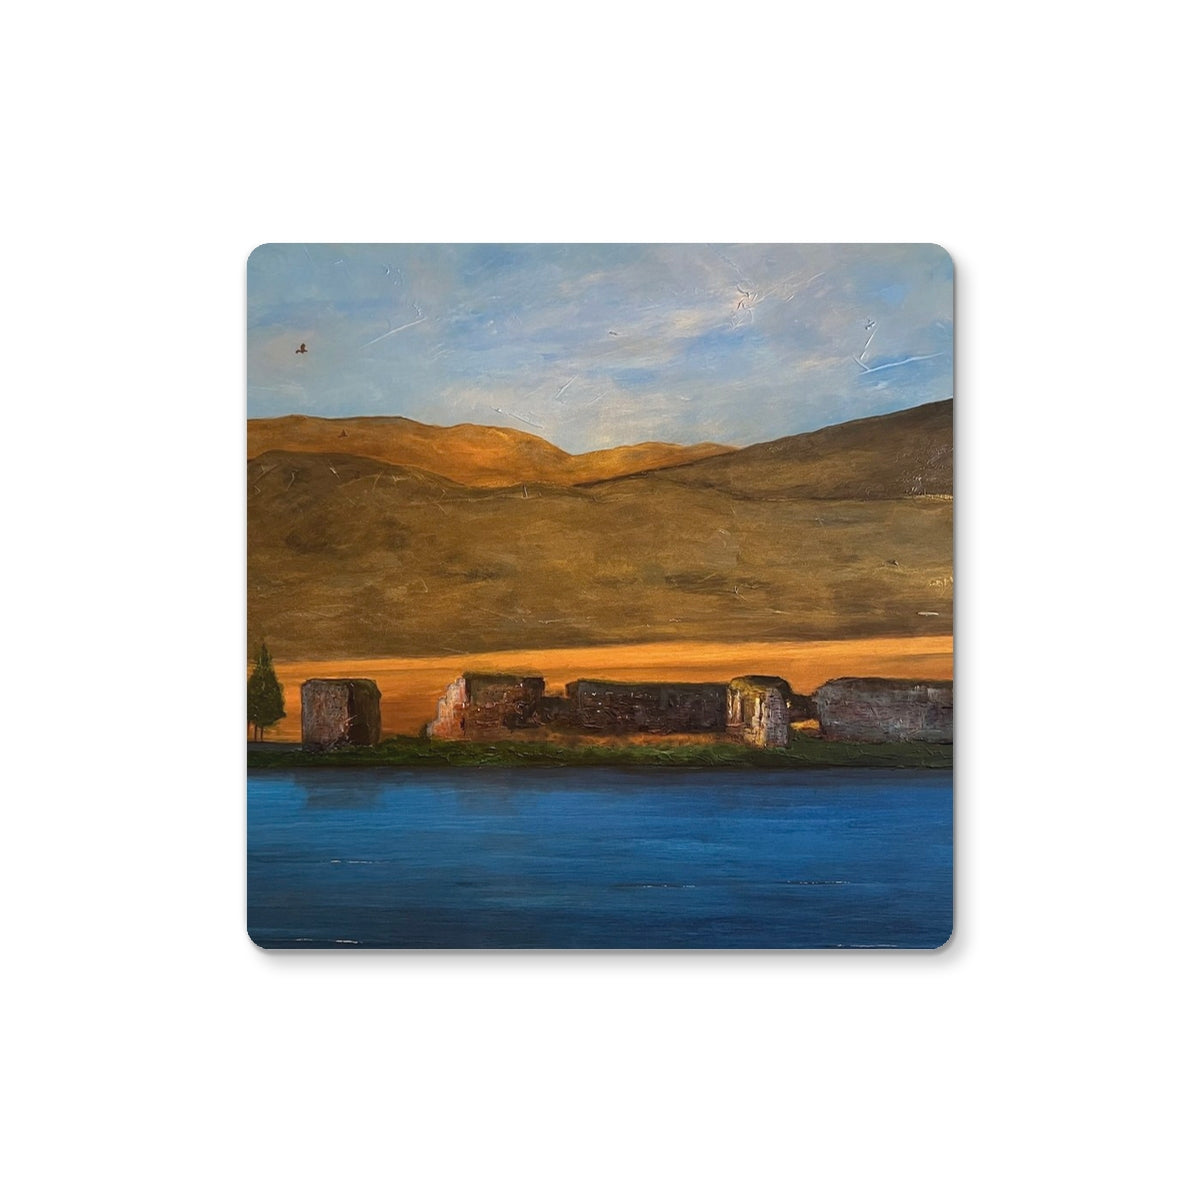 Lochindorb Castle Art Gifts Coaster-Coasters-Scottish Lochs & Mountains Art Gallery-6 Coasters-Paintings, Prints, Homeware, Art Gifts From Scotland By Scottish Artist Kevin Hunter